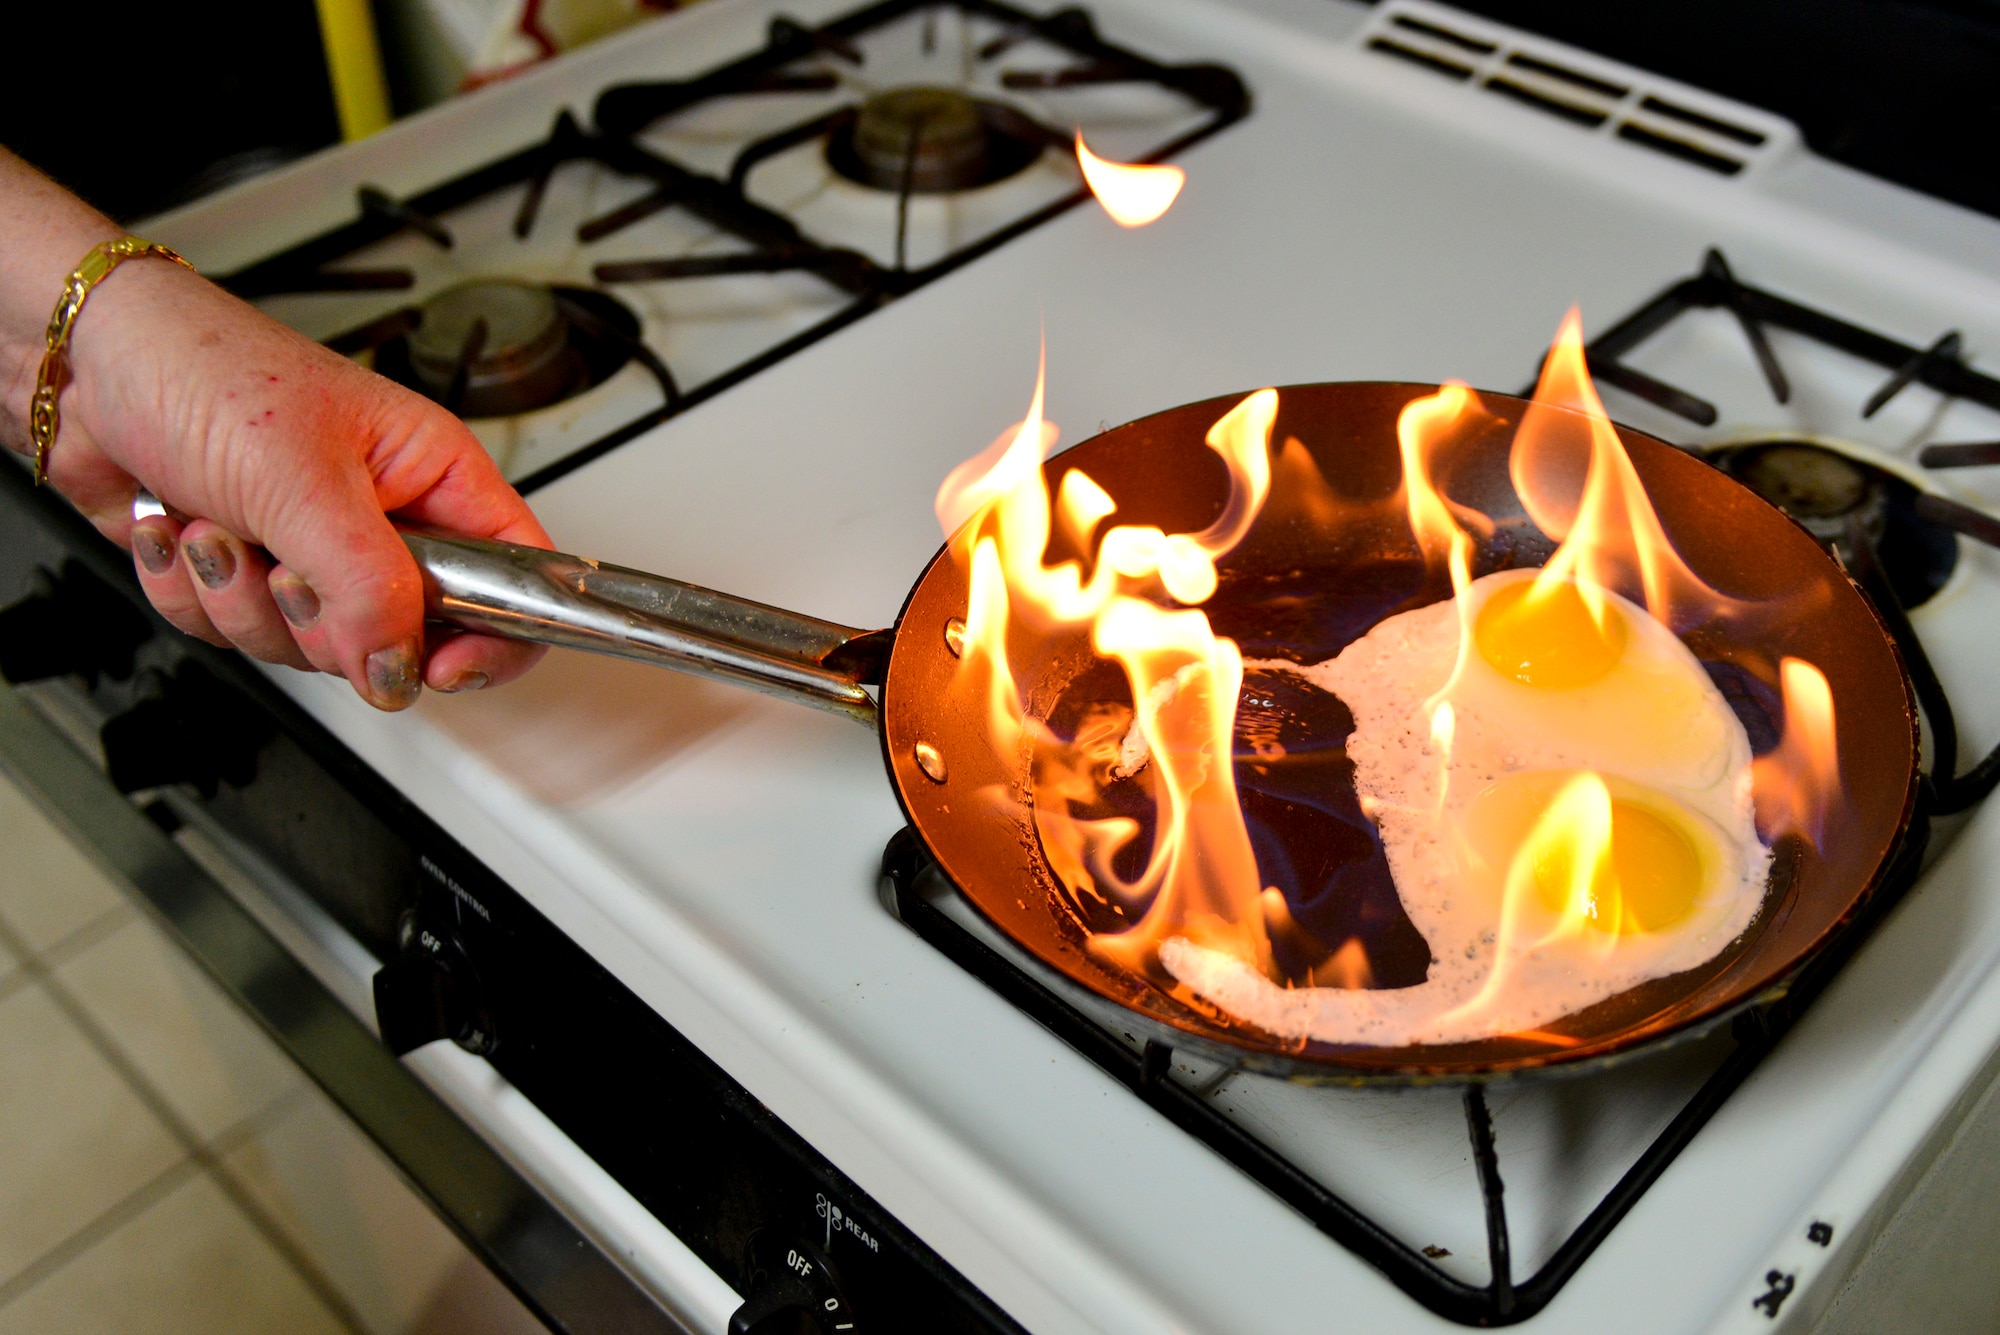 Thanksgiving brings families and friends together to share a meal, conversation and laughter, but it also comes with an increased risk of fires. One tip to eliminate a flame is to cover the pan, putting out the fire. (U.S. Air Force Photo illustration/Airman 1st Class Mozer Da Cunha)